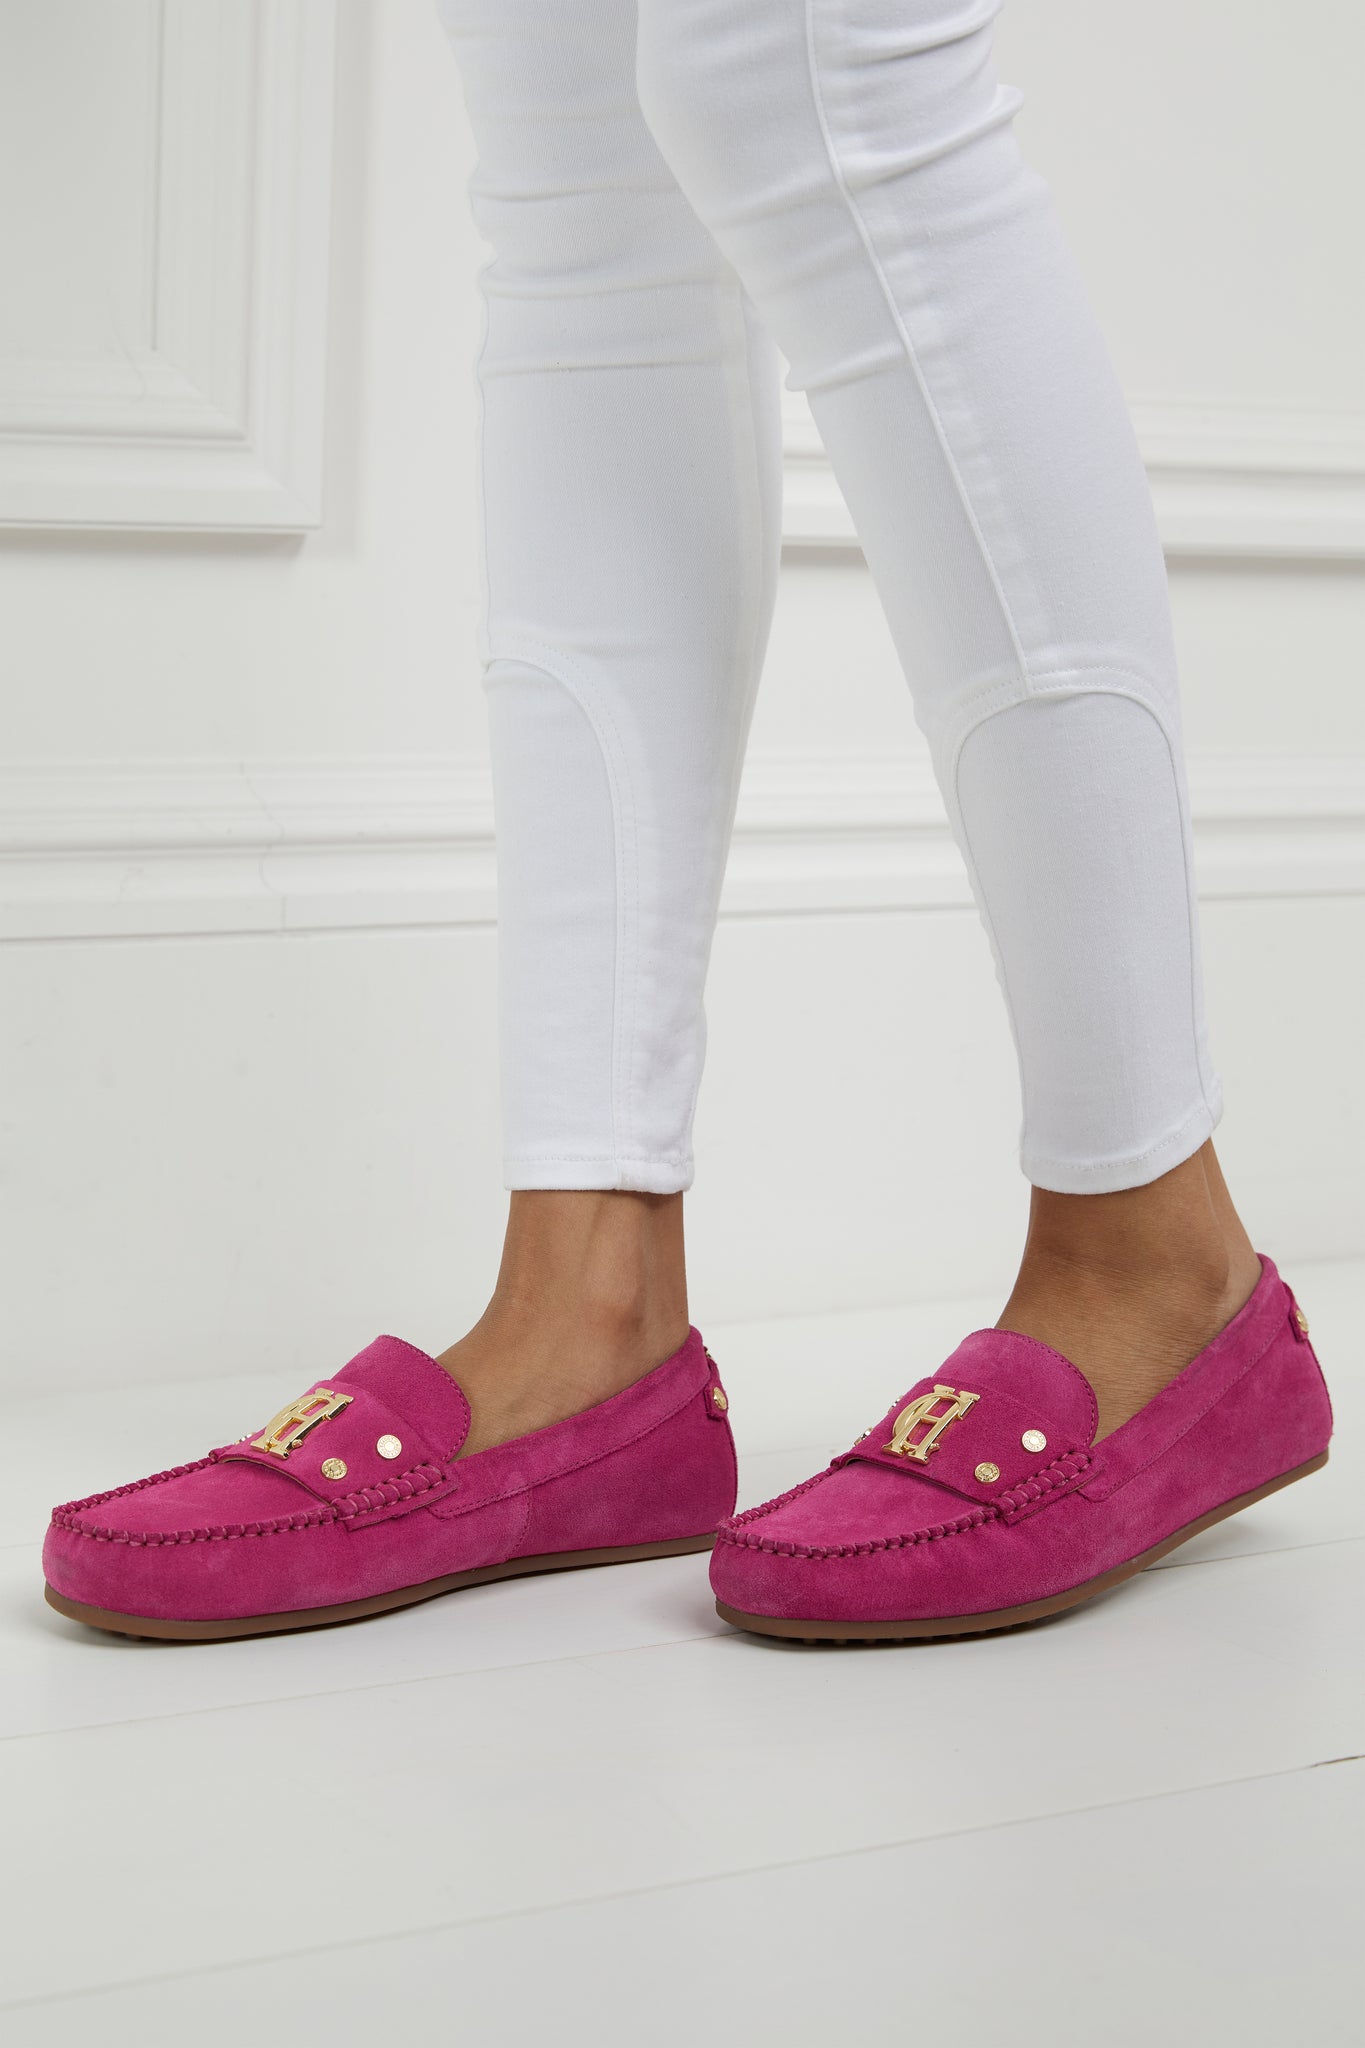 bright pink suede loafers with a leather sole and top stitching details and gold hardware paired with white skinny jeans